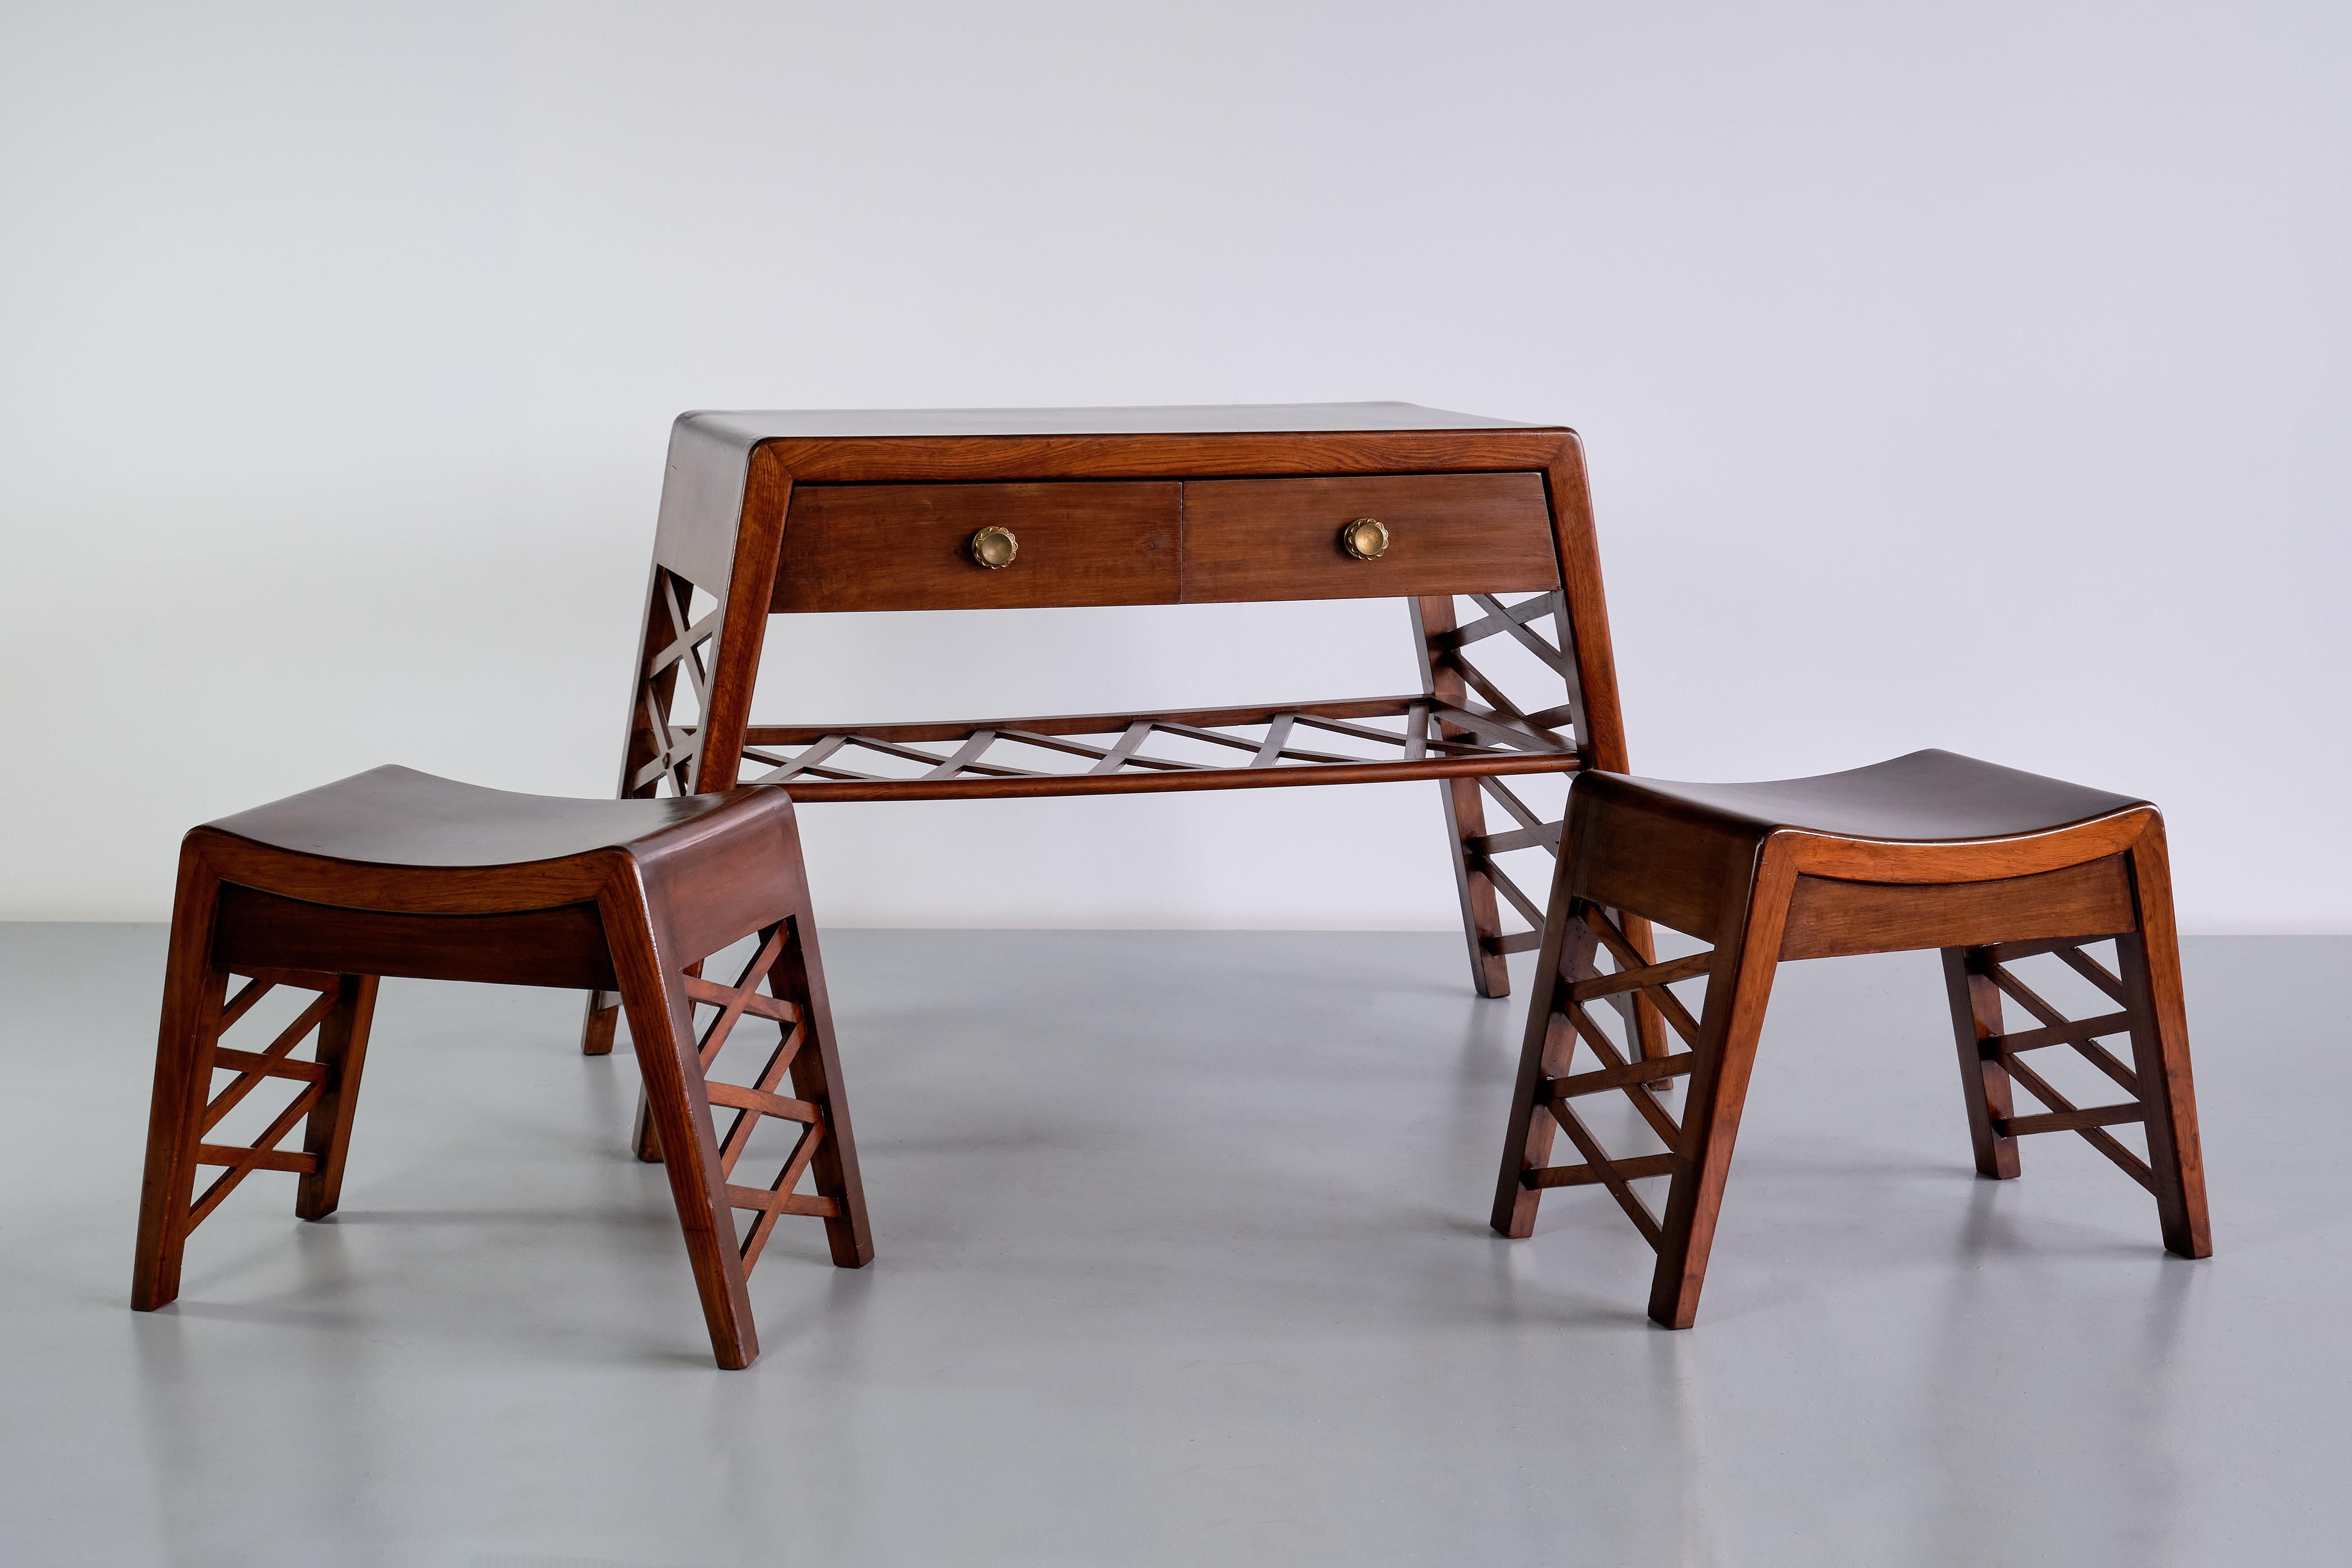 This elegant console was manufactured in Italy in the late 1930s. The console together with the stools (in the second picture) was part of the interior of a private villa in Milan. The design is attributed to Piero Portaluppi. The set was likely